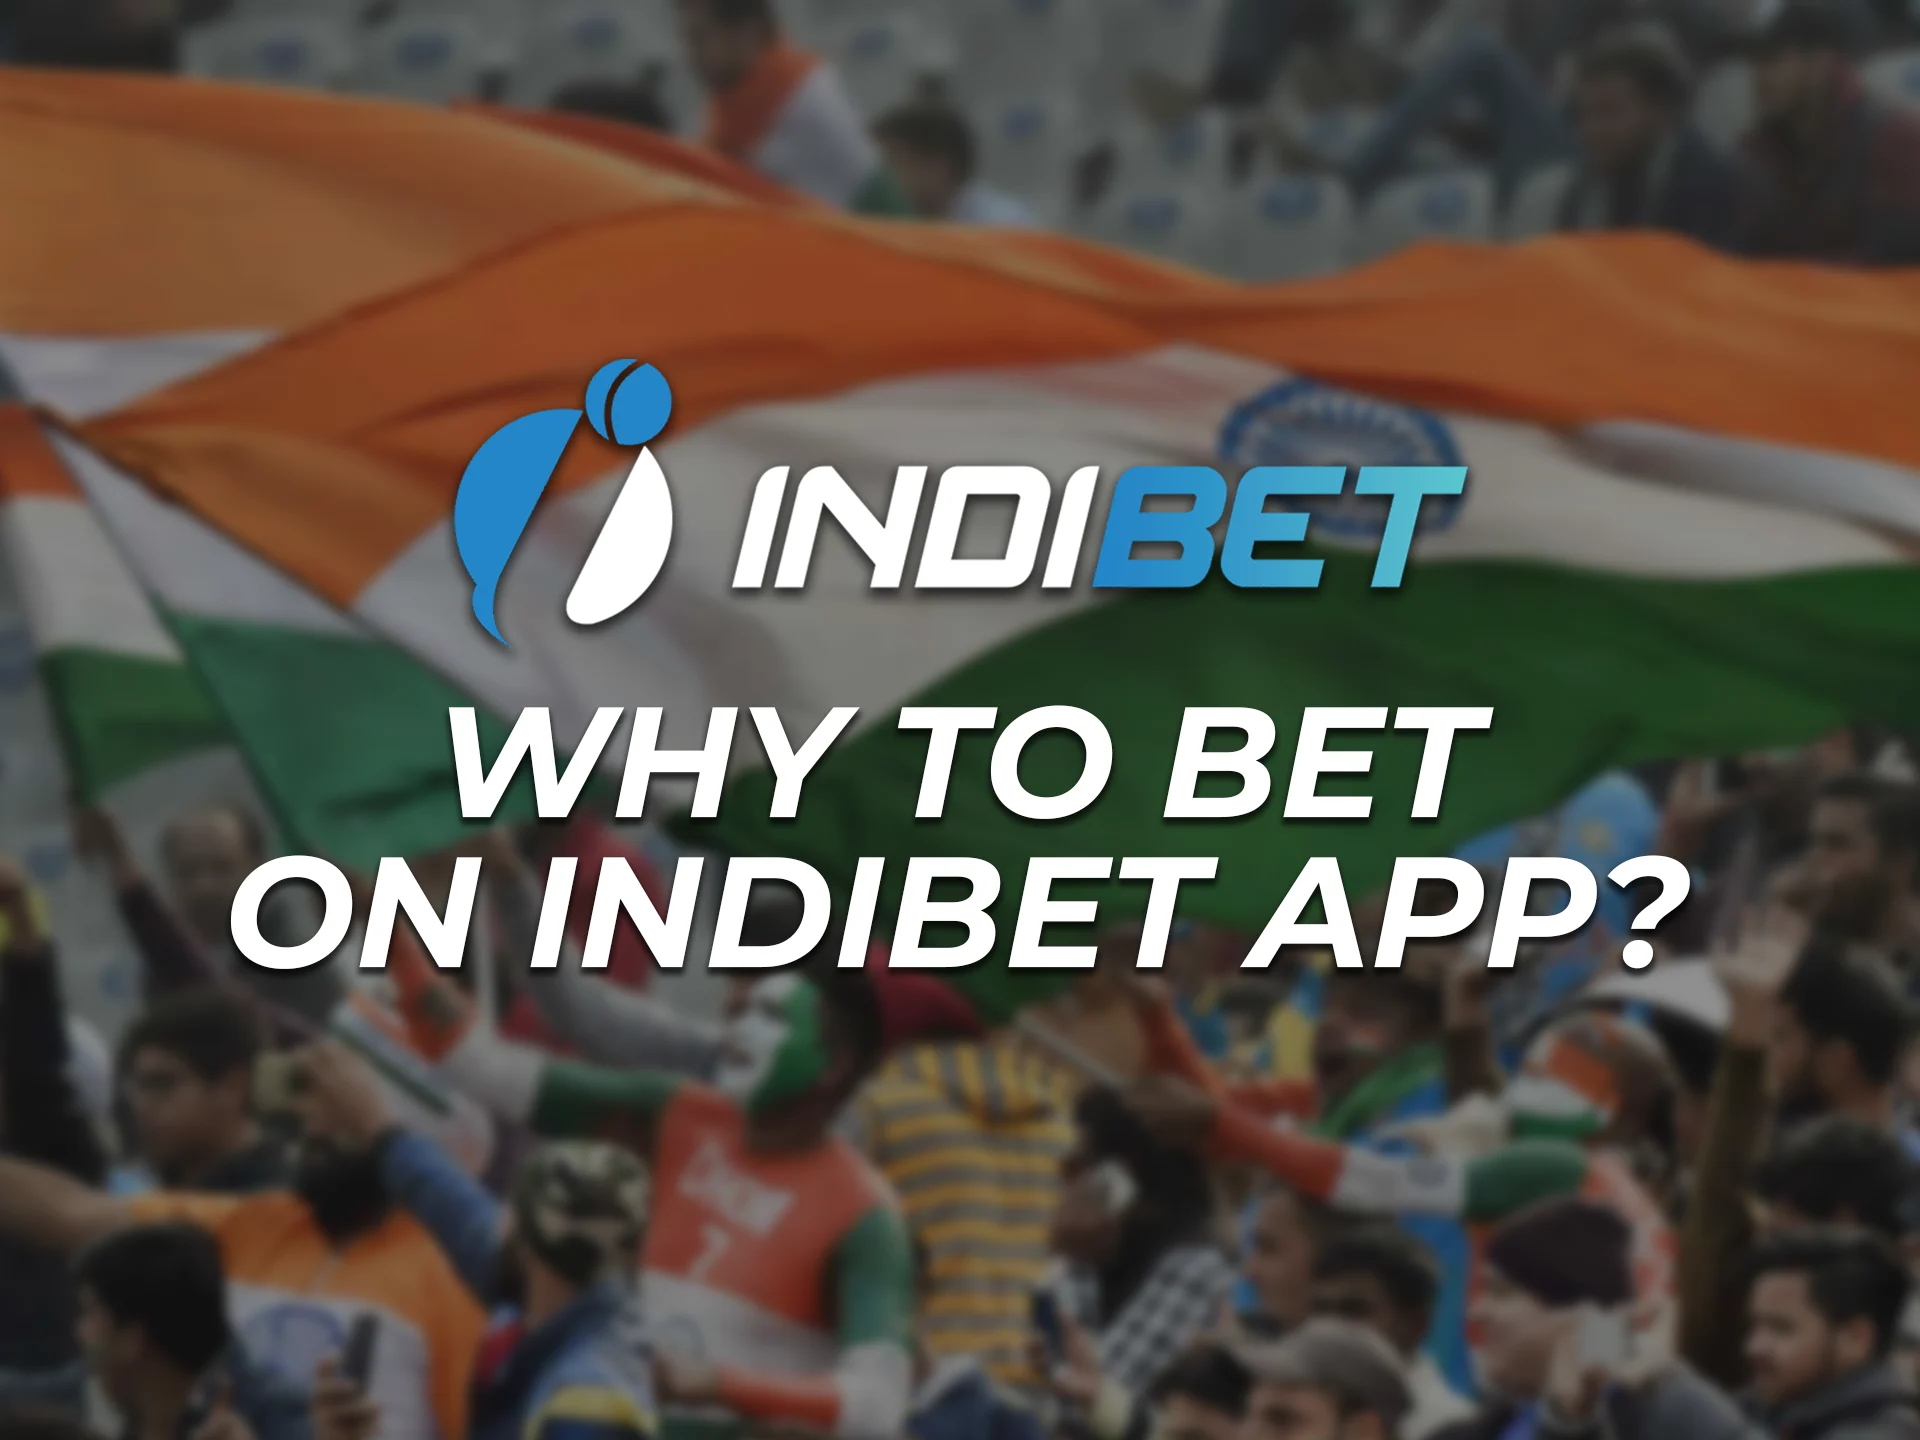 The Indibet app allows you to bet on sports and play casino games with maximum comfort.